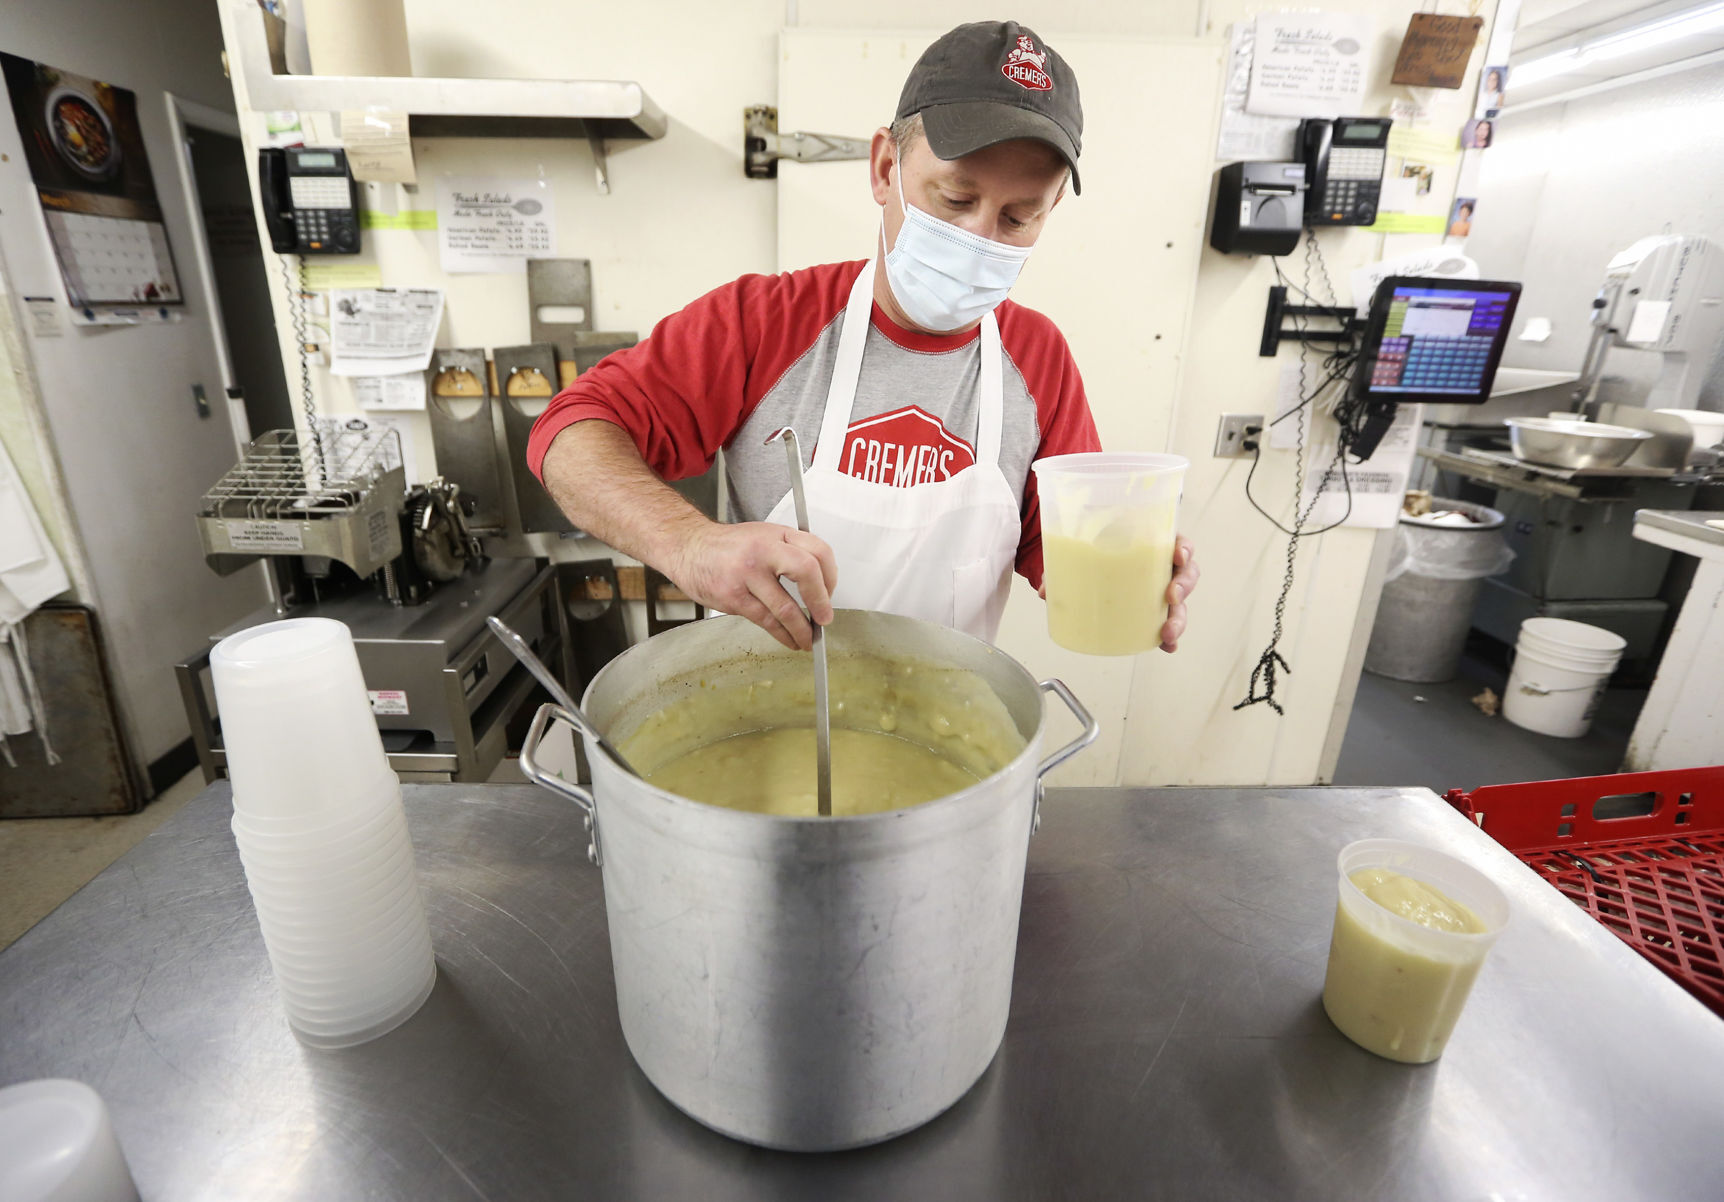 Jeff Cremer fills to-go containers of homemade turkey gravy at Cremer